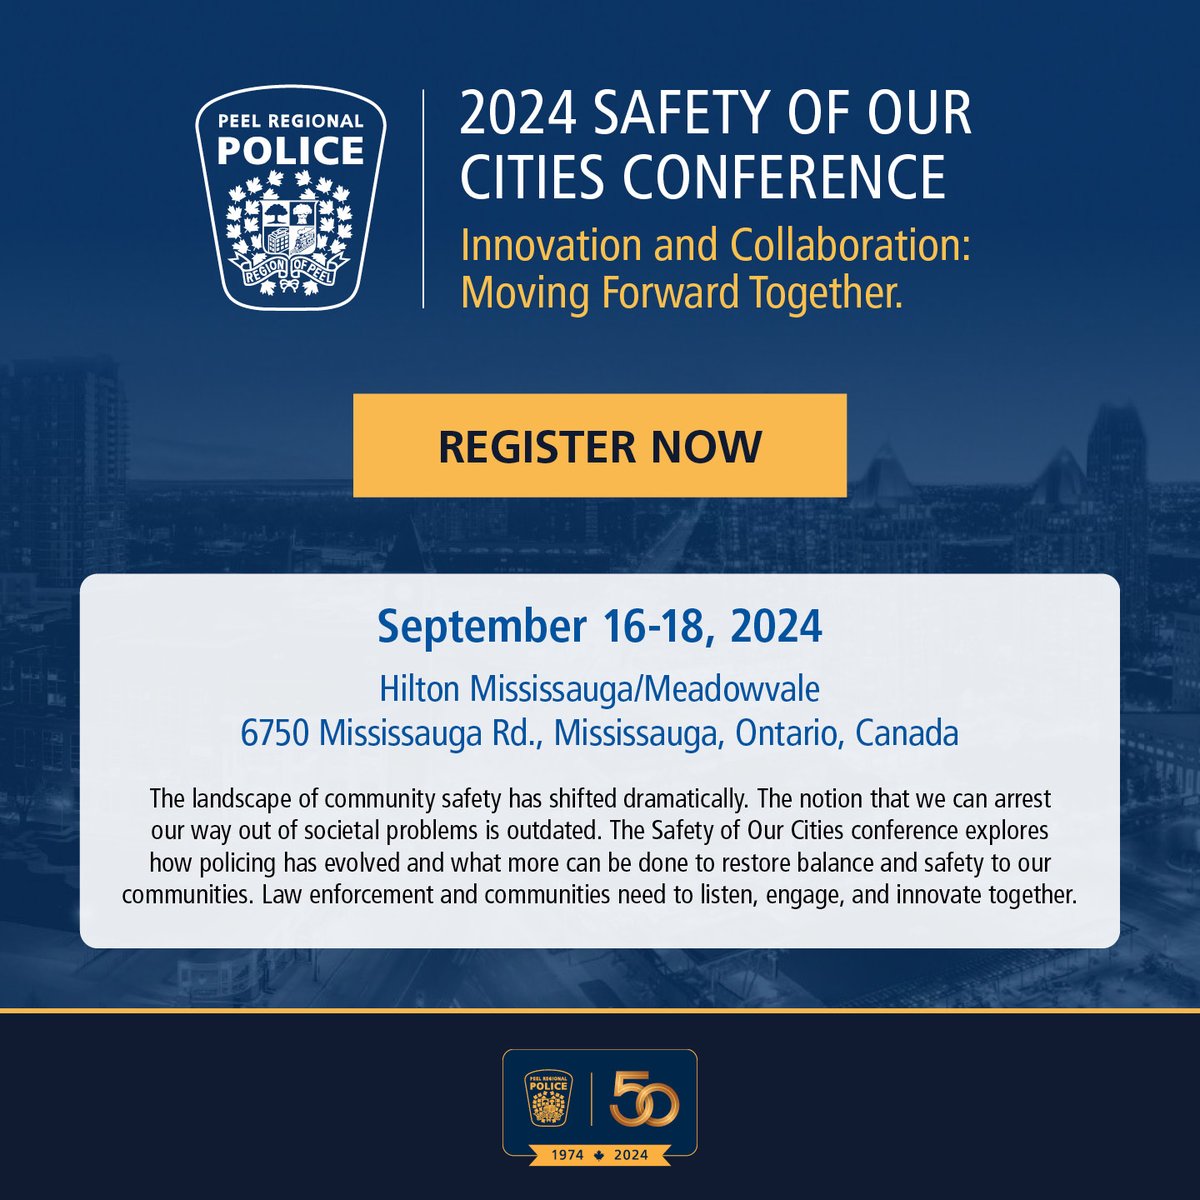 Join us for the 2nd Annual Safety of our Cities Conference: Sept 16-18th. #SafetyofOurCities conf explores how policing has evolved, & restoring balance/safety in our communities. Call for Proposals & Registration now open: safetycitiesconference.ca  #PRP #OACP #MCCA